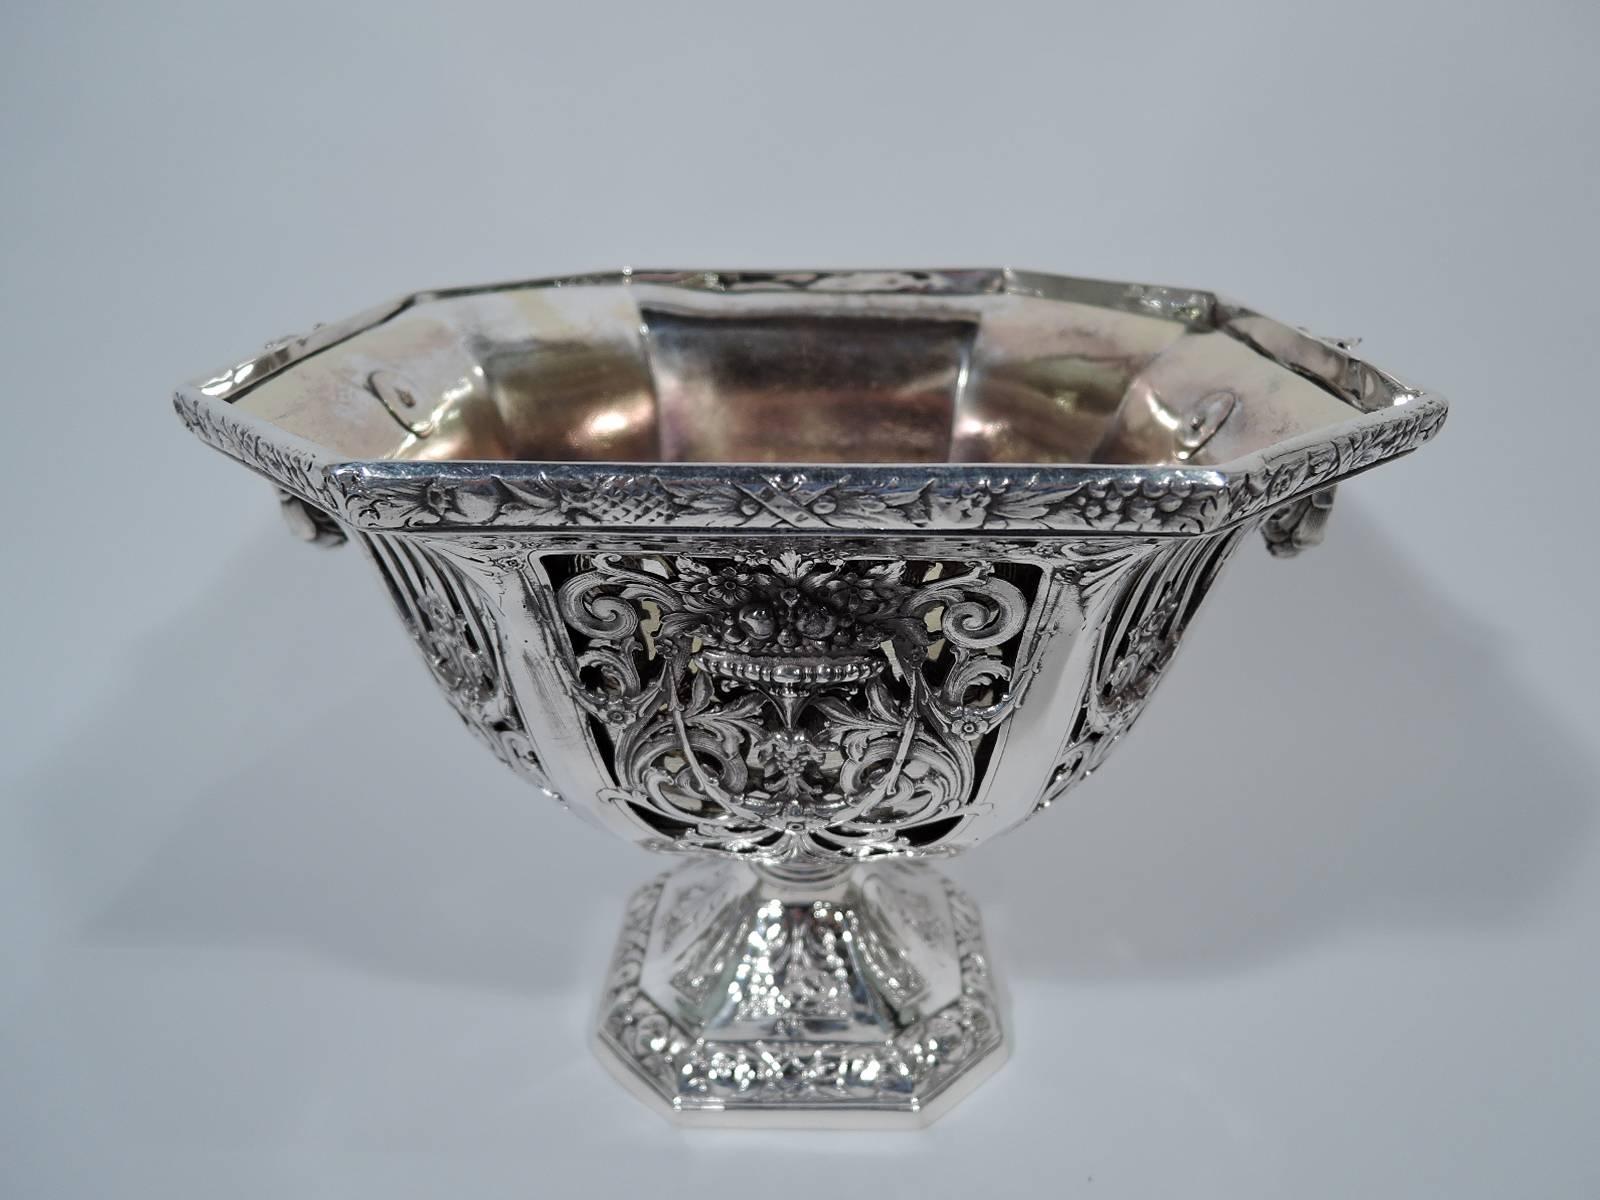 Sumptuous sterling silver jardinière. Retailed by Bailey, Banks & Biddle in Philadelphia. Square rim with chamfered corners, curved sides, and raised foot, which is also square and chamfered. Bowl has pierced scrollwork with applied flower baskets